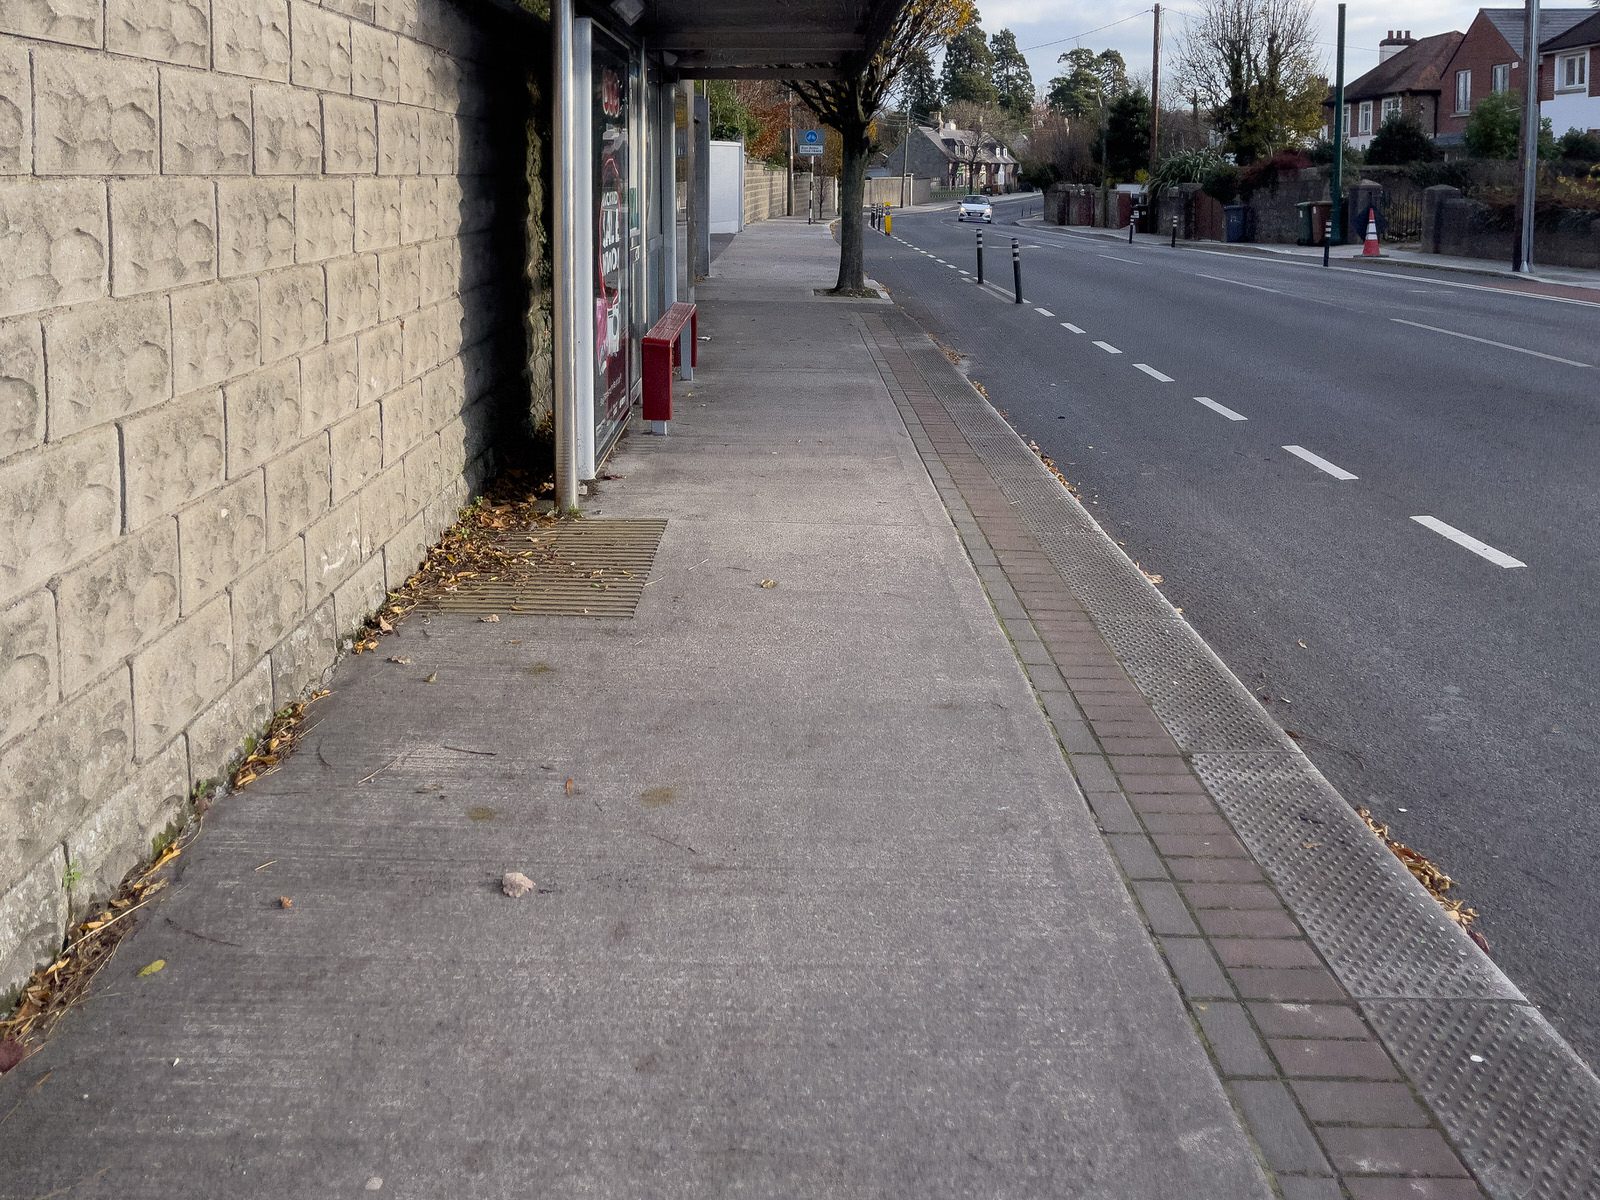 MY FIRST DAY WITHOUT THE 17 BUS SERVICE [WALK FROM S4 BUS STOP IN UCD TO ROEBUCK ROAD]-225588-1